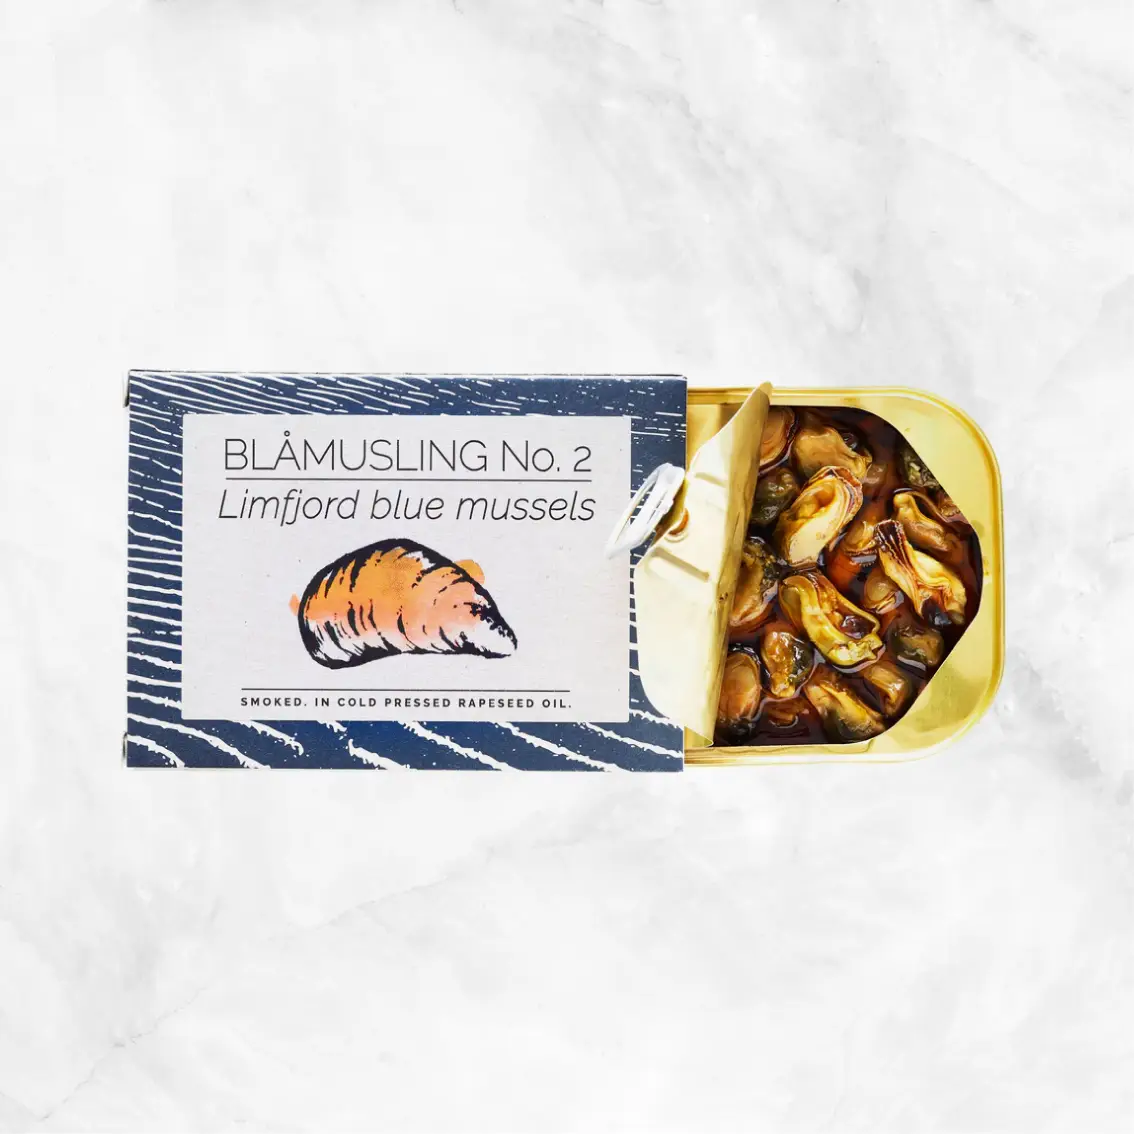 Blåmuslinger No. 2 Limfjord Blue Mussels Smoked in Cold Pressed Rapeseed Oil